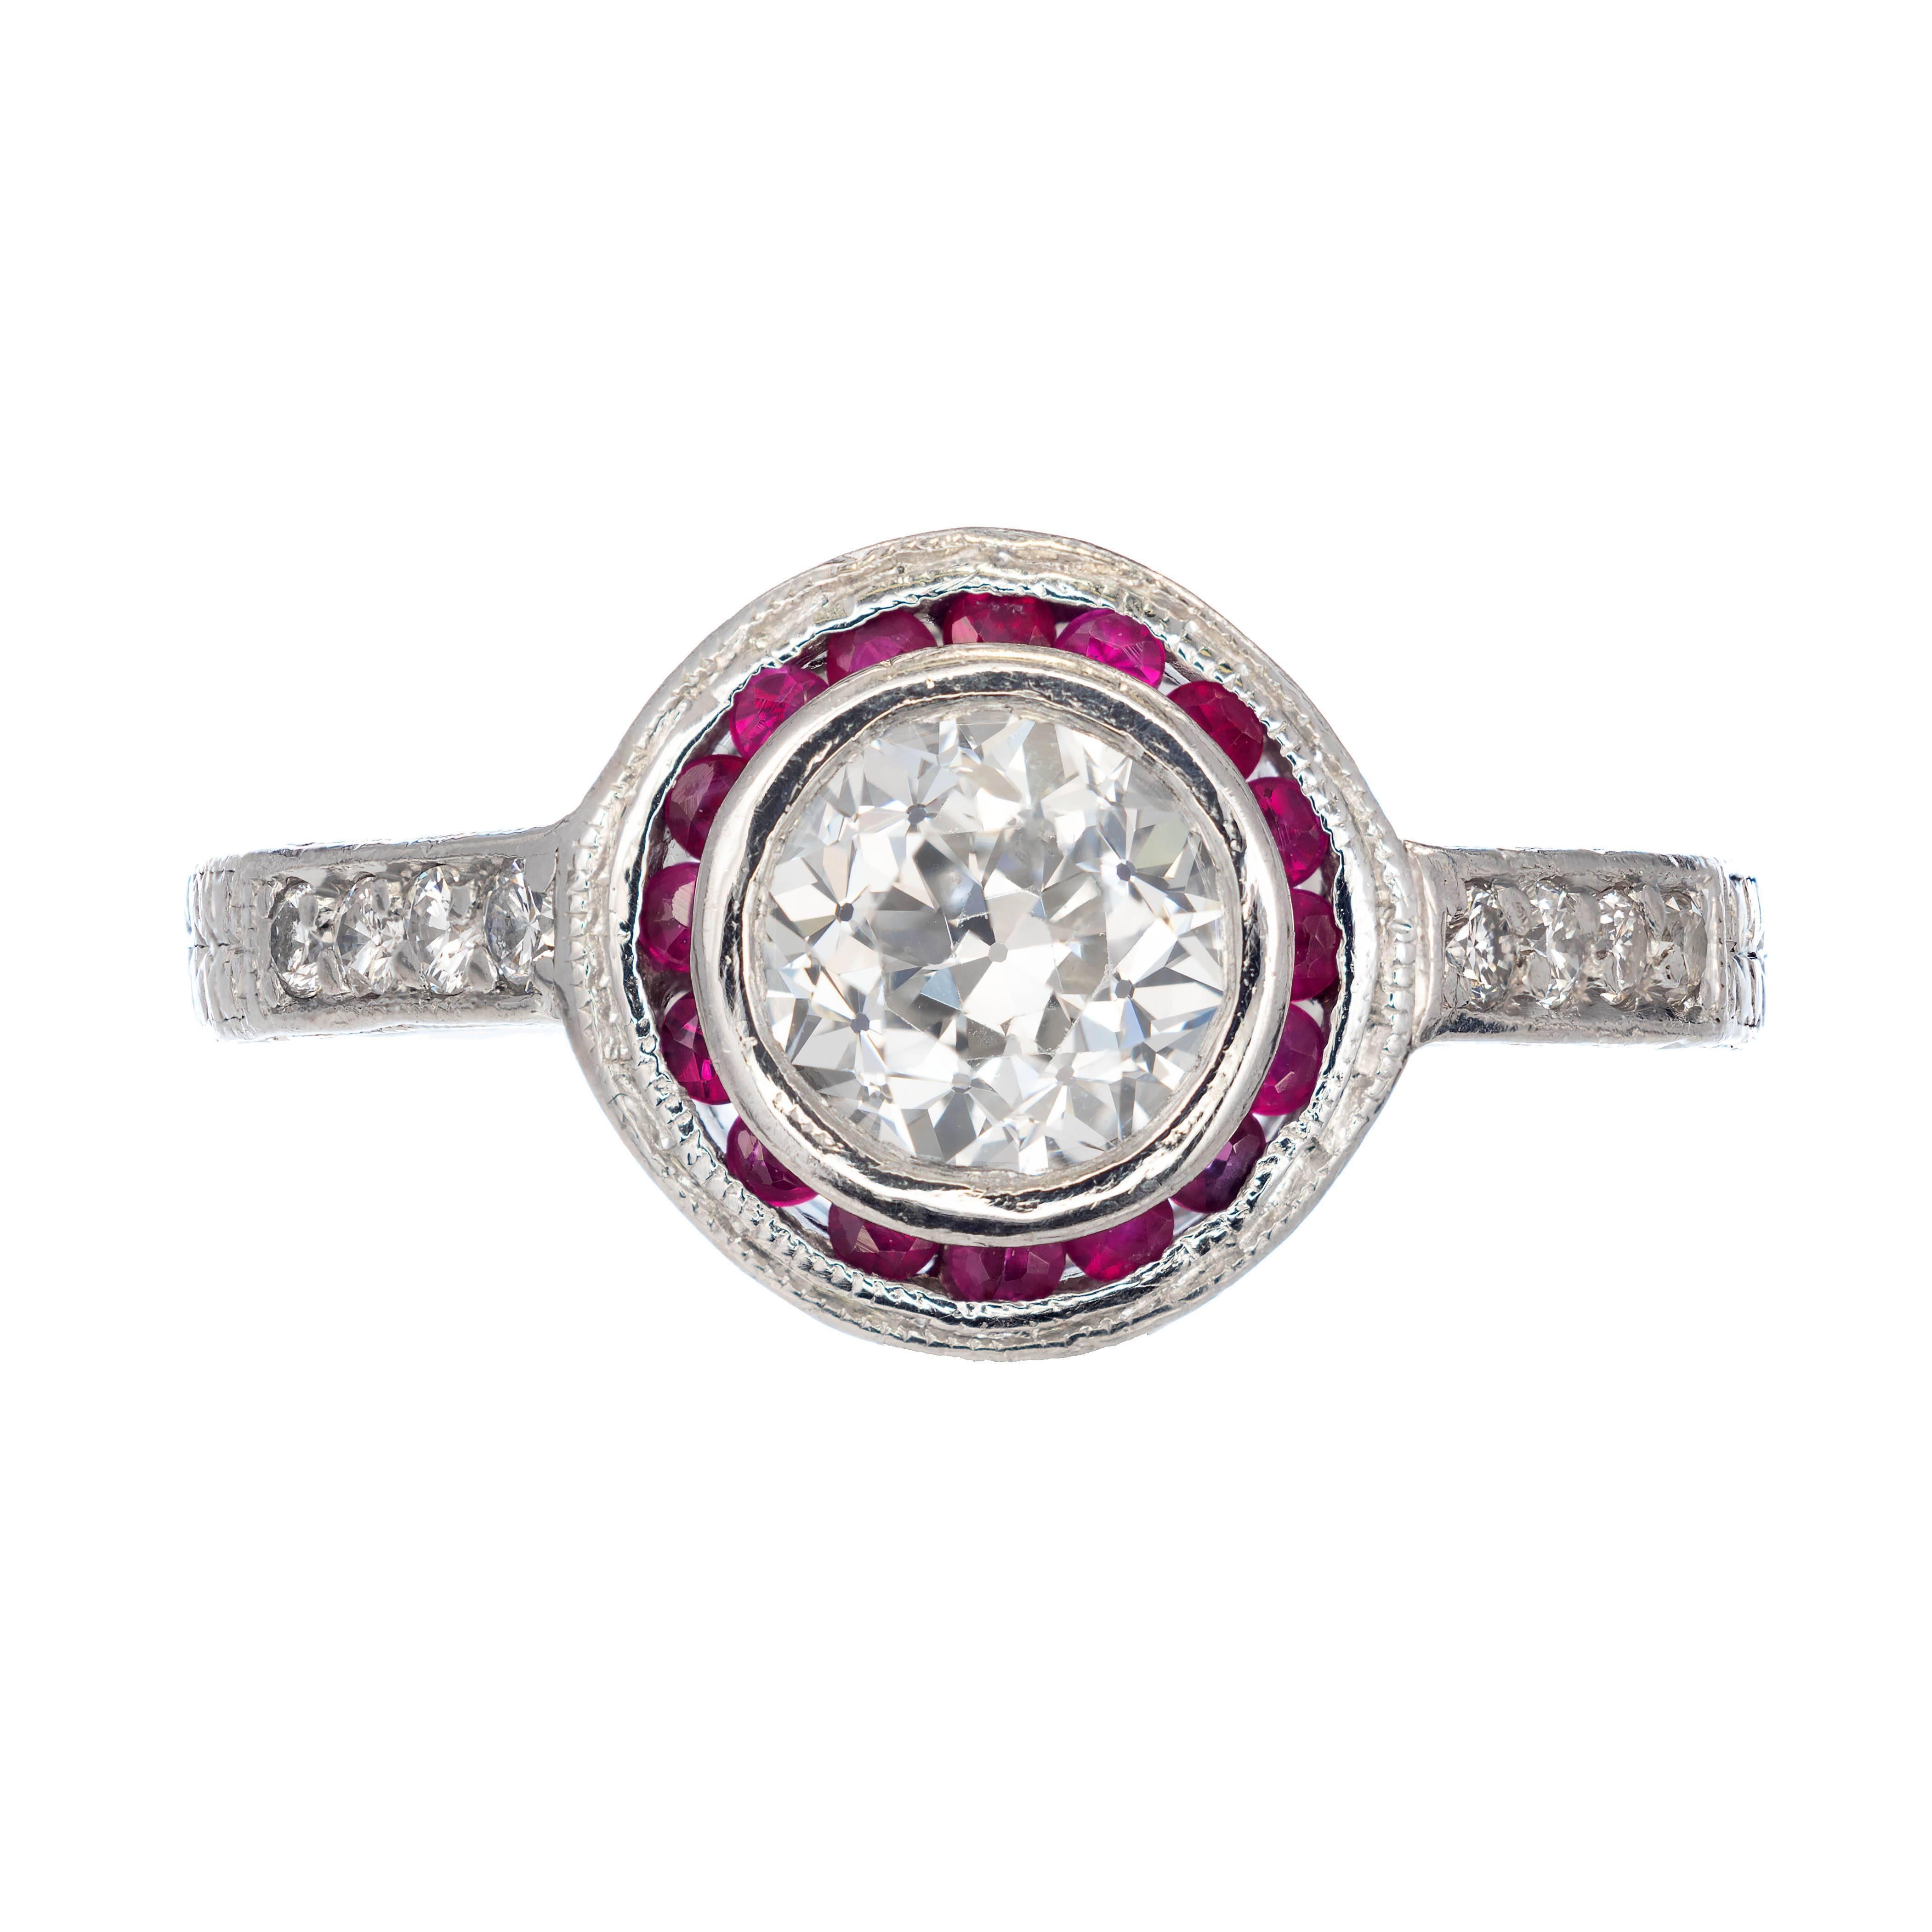 EGL certified diamond and ruby halo engagement ring. 1.07ct round center diamond in a Platinum setting with a halo of genuine round rubies. Raised crown and small table graded by the good polish and good symmetry. The shoulders are bead set with 8